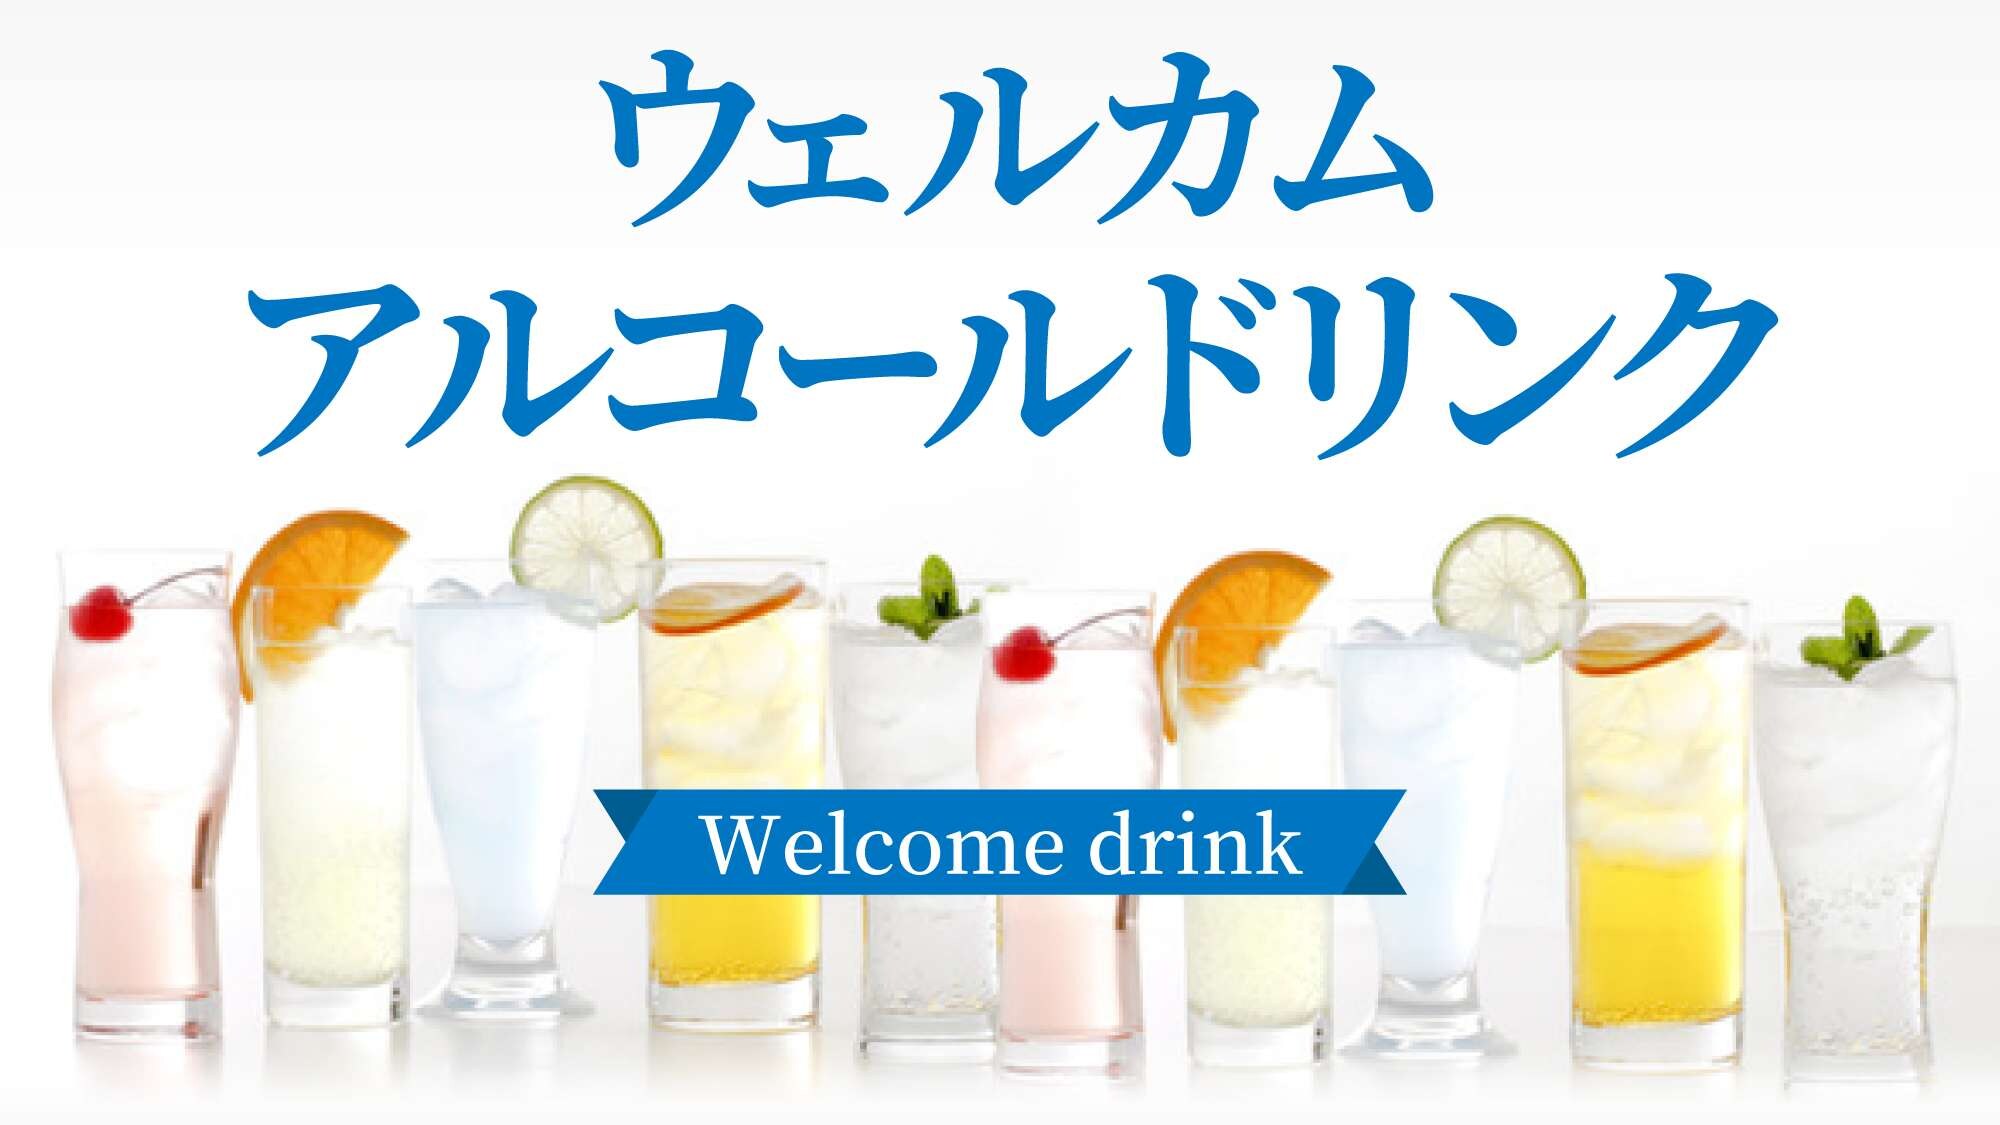 Welcome alcoholic drink